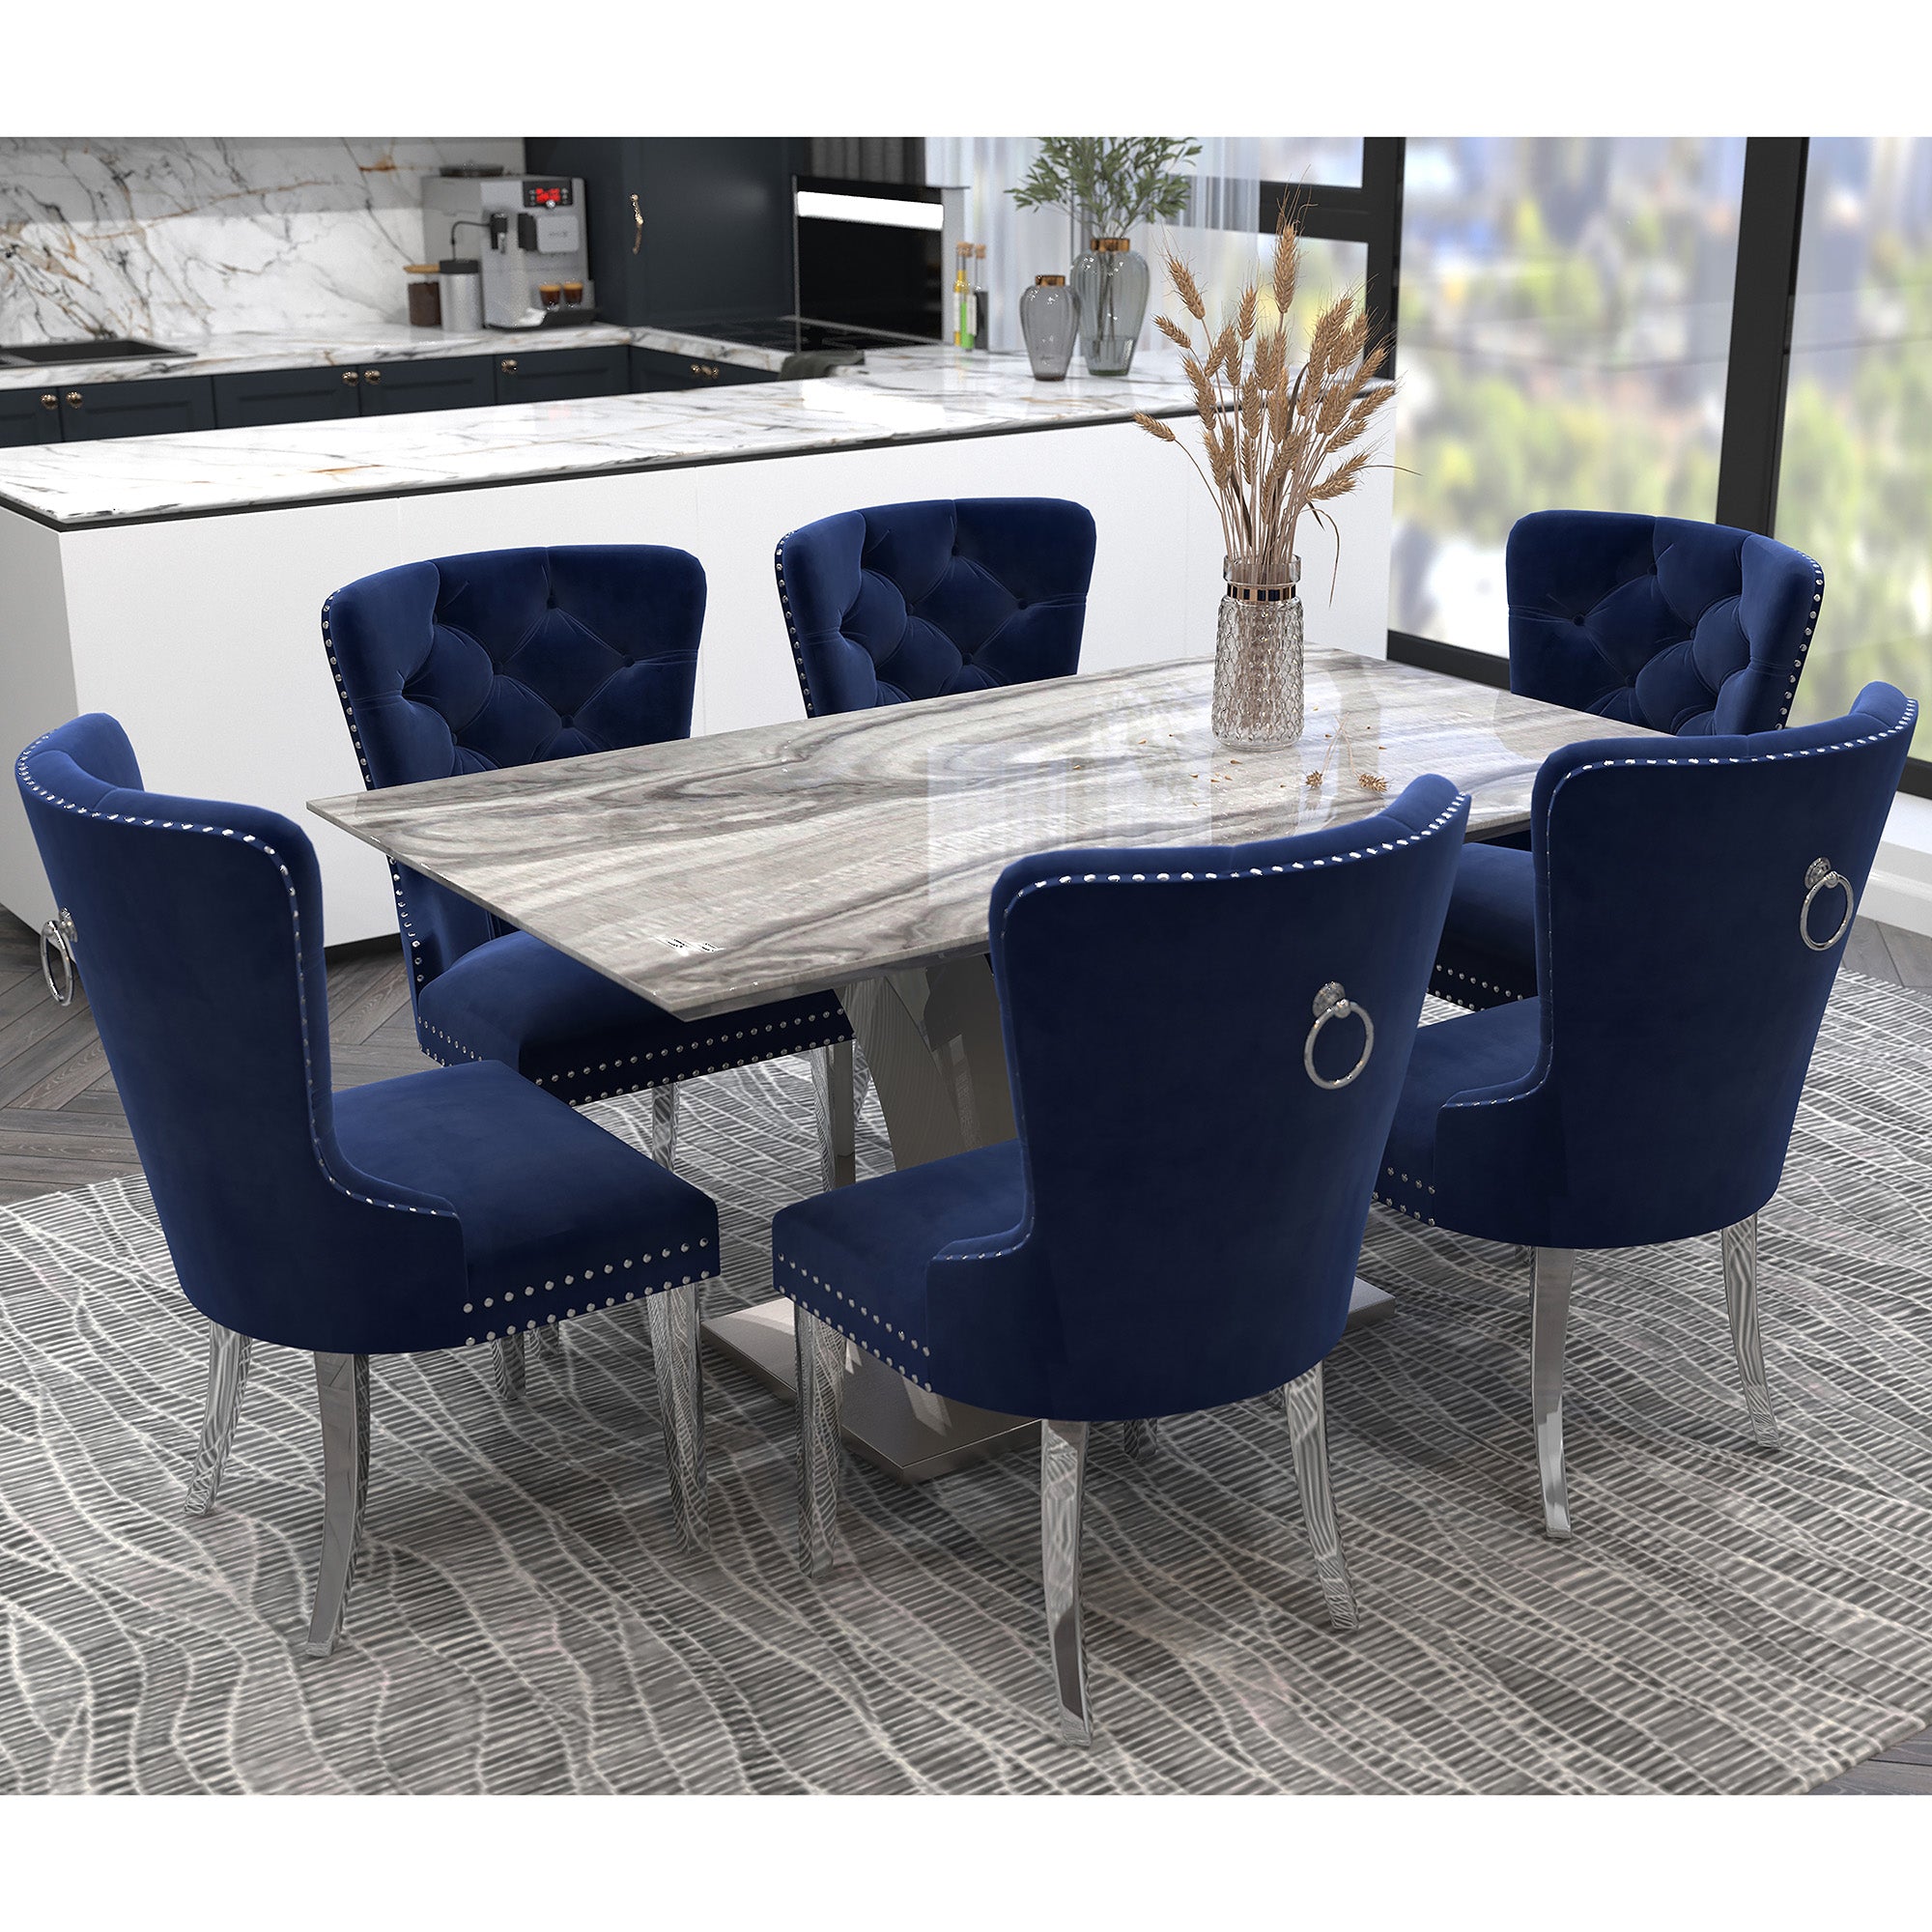 NAPOLI 63" GREY DINING TABLE / HOLLIS NAVY CHAIRS - 7PC DINING SET